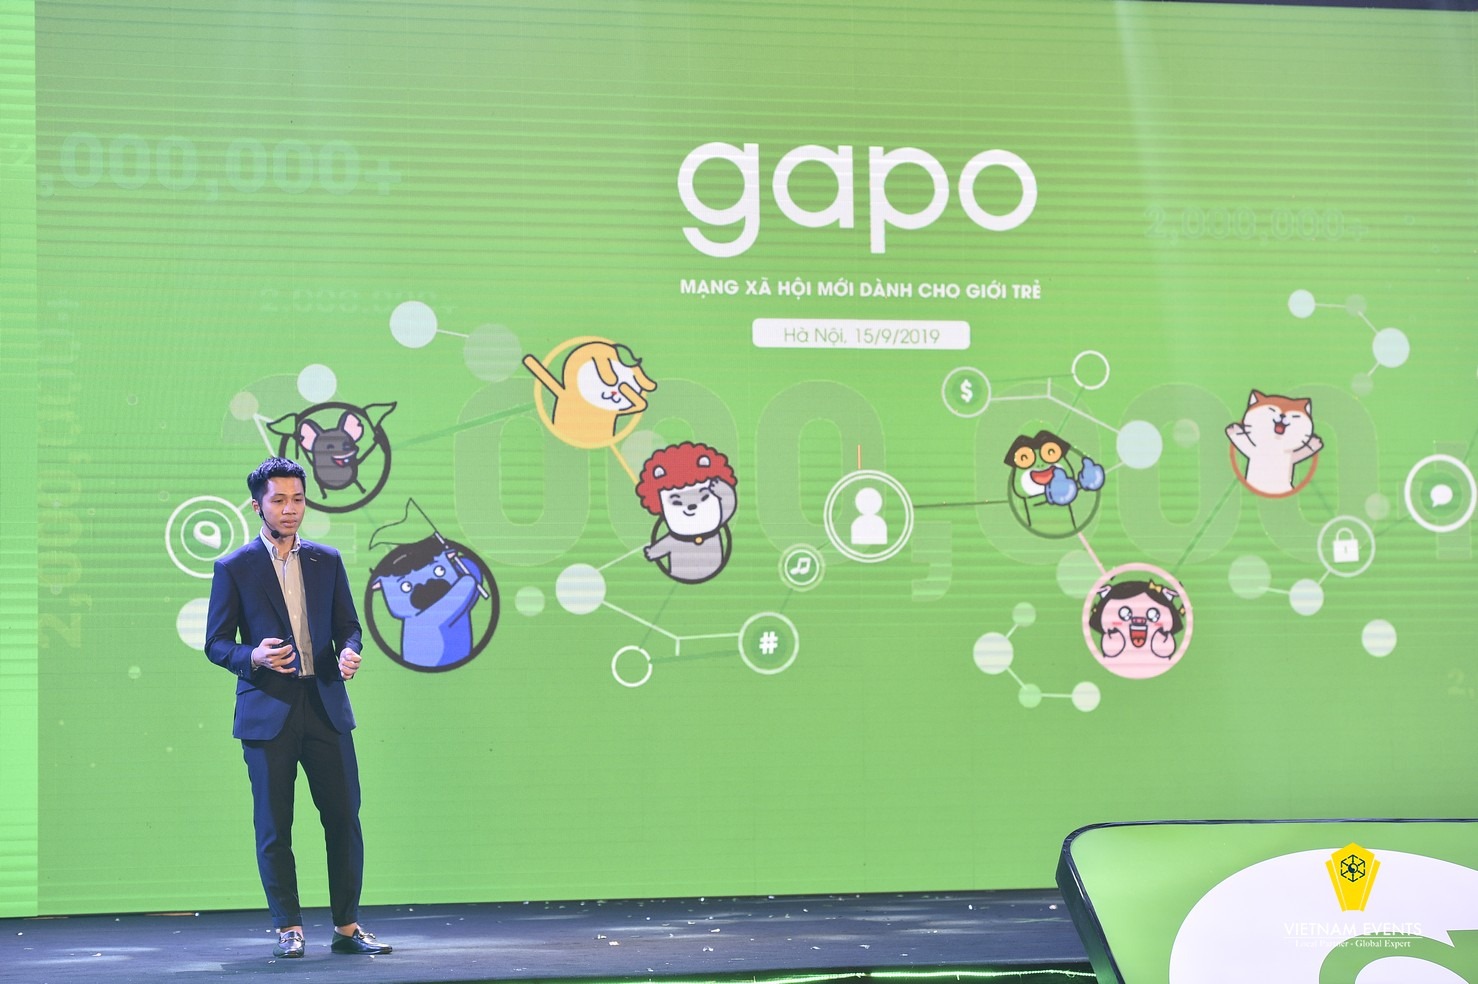 GAPO REACHED 2 MILLIONS USERS